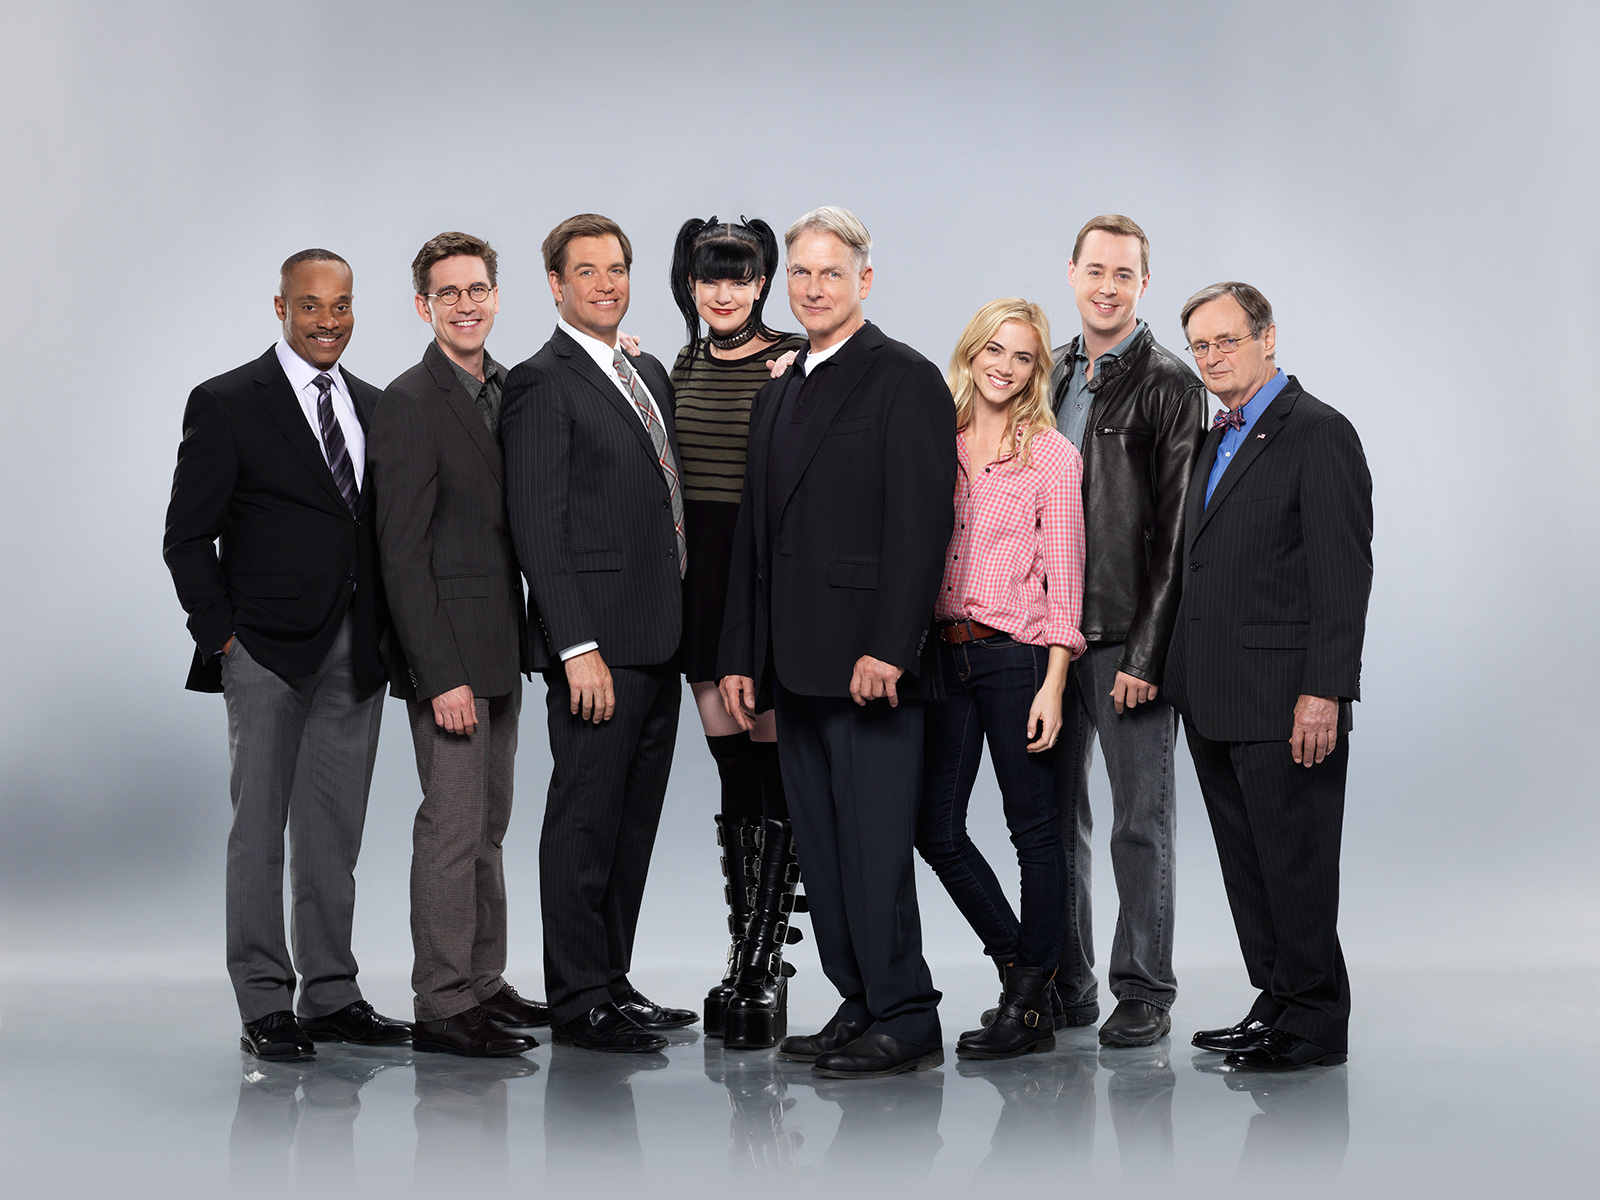 ncis-new-showrunners-named-for-cbs-series-canceled-tv-shows-tv